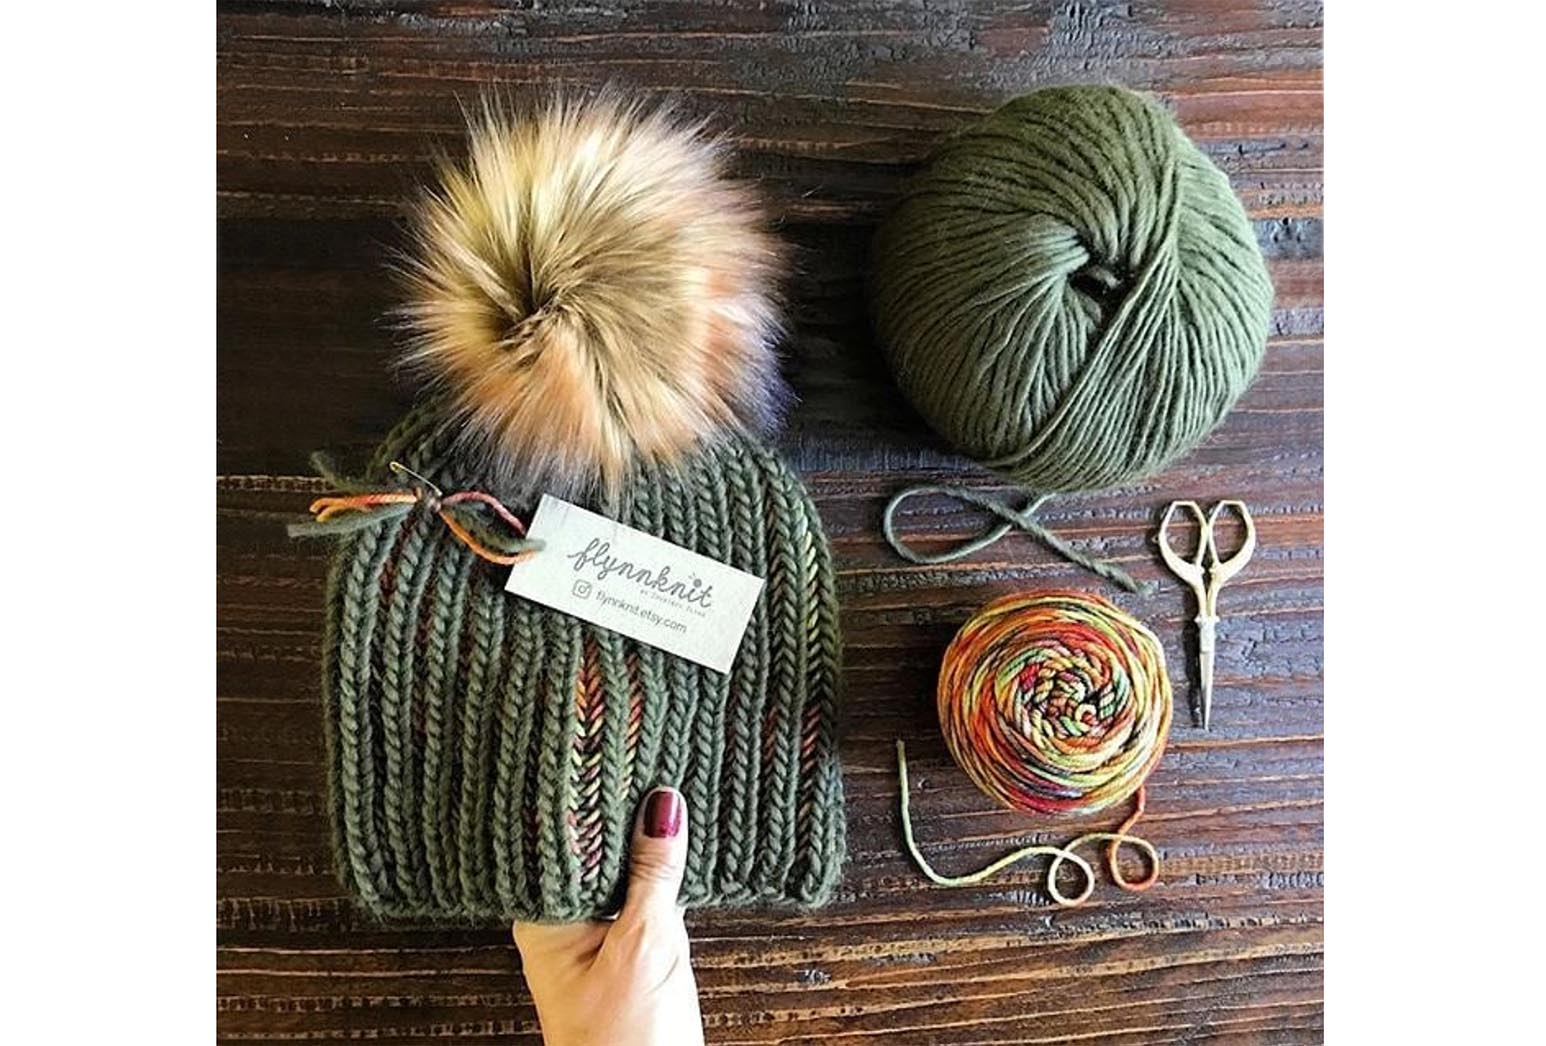 Discover the unique items that Flynnknit creates.